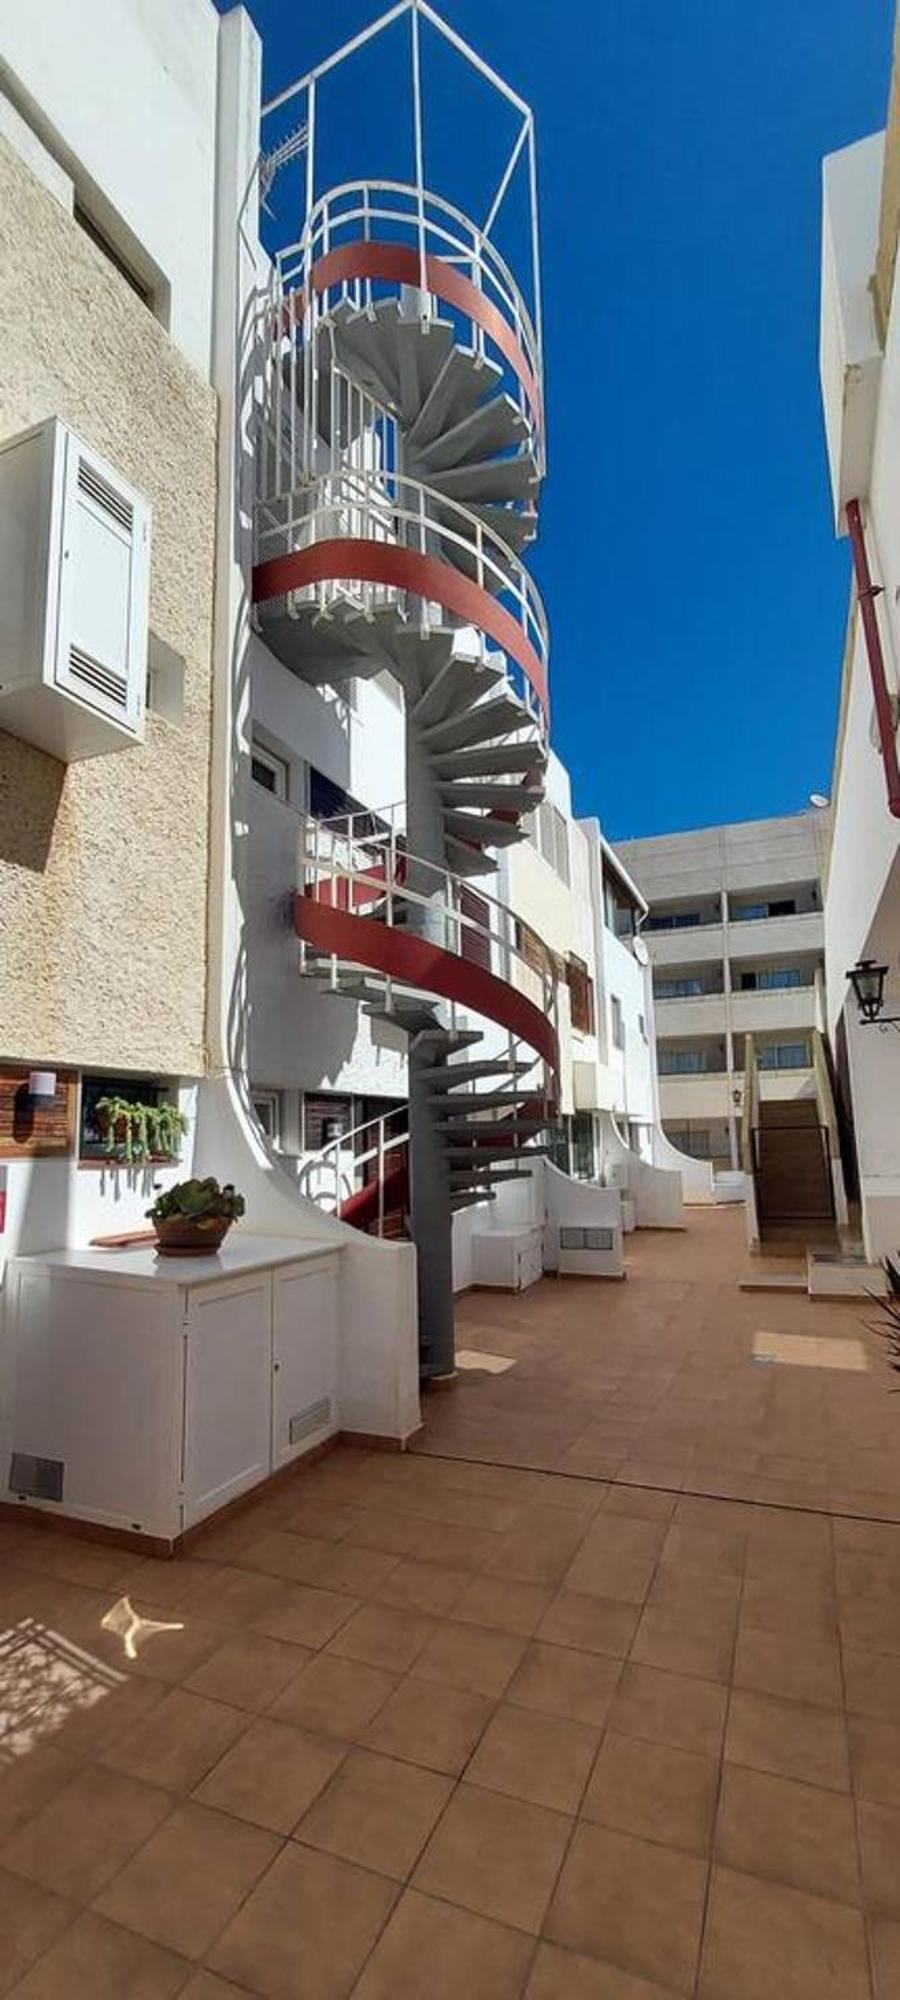 2 Bedrooms Appartement At Arona 500 M Away From The Beach With Shared Pool Jacuzzi And Terrace Exterior foto